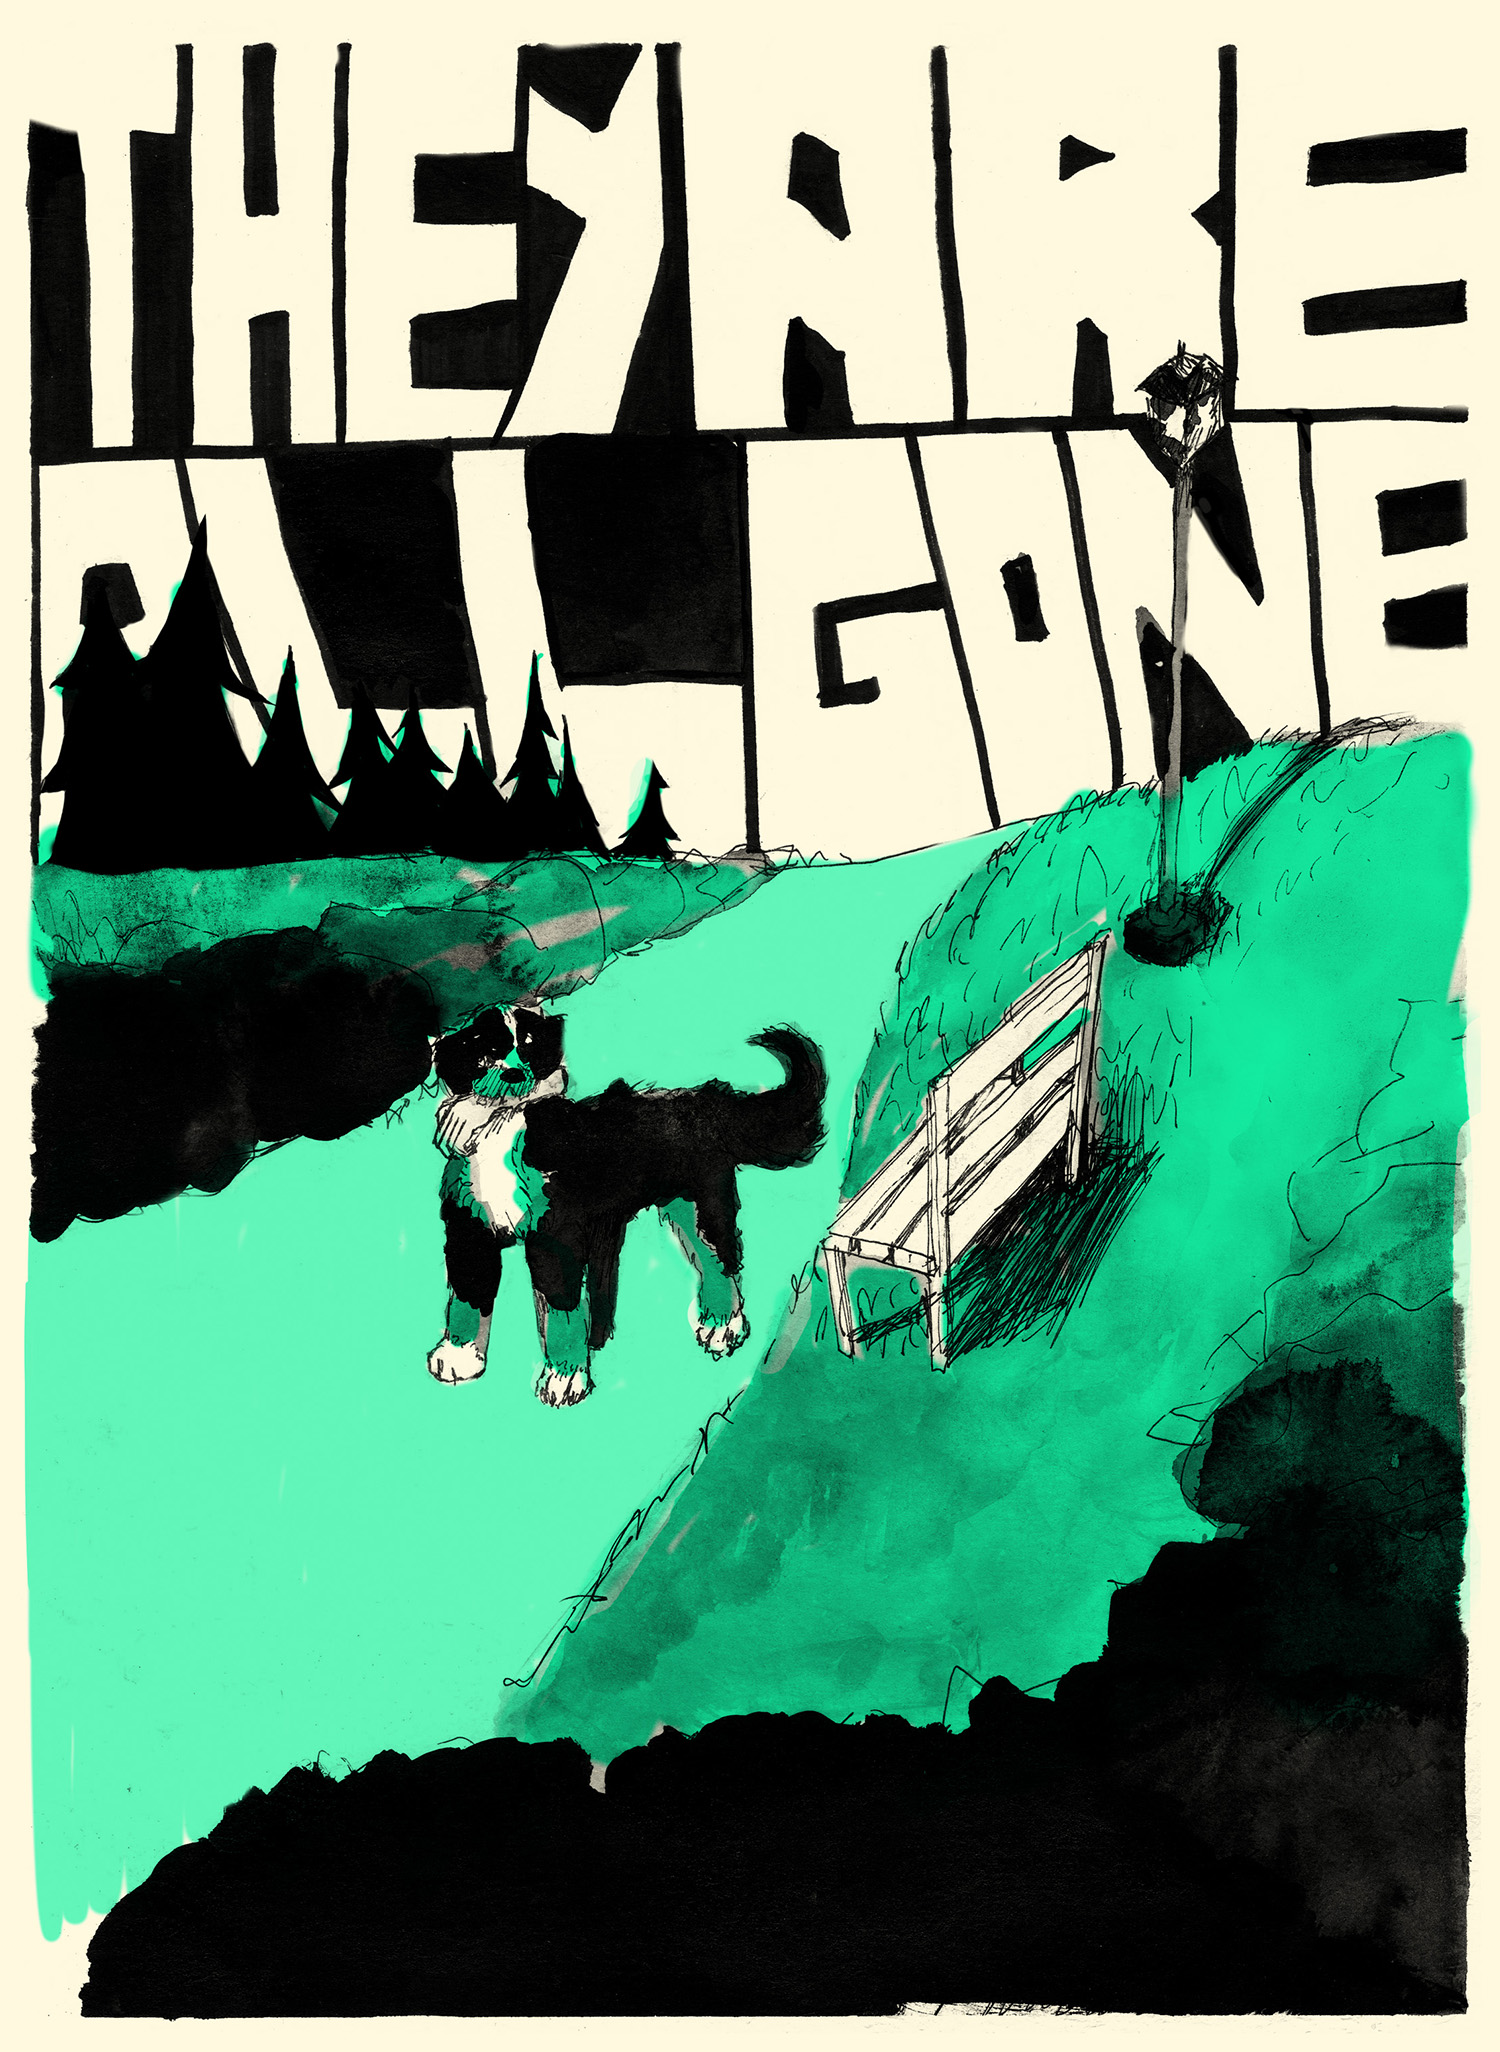 Green, white, and cream poster showing a dog next to a bench on a nondescript path. Words at the top of the image read "They are all gone."